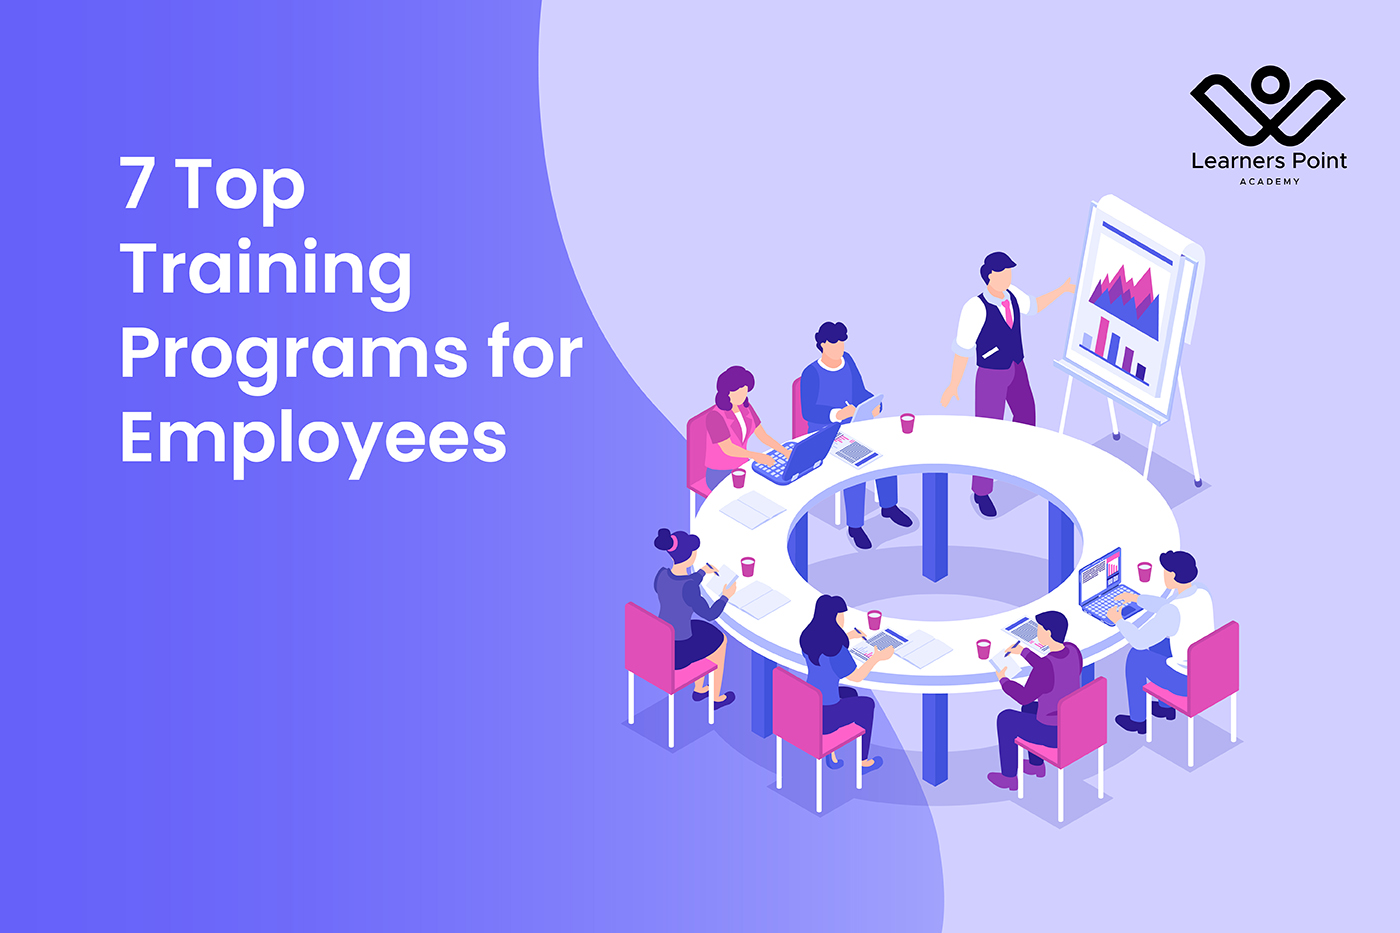 7 Top Training Programs for Employees